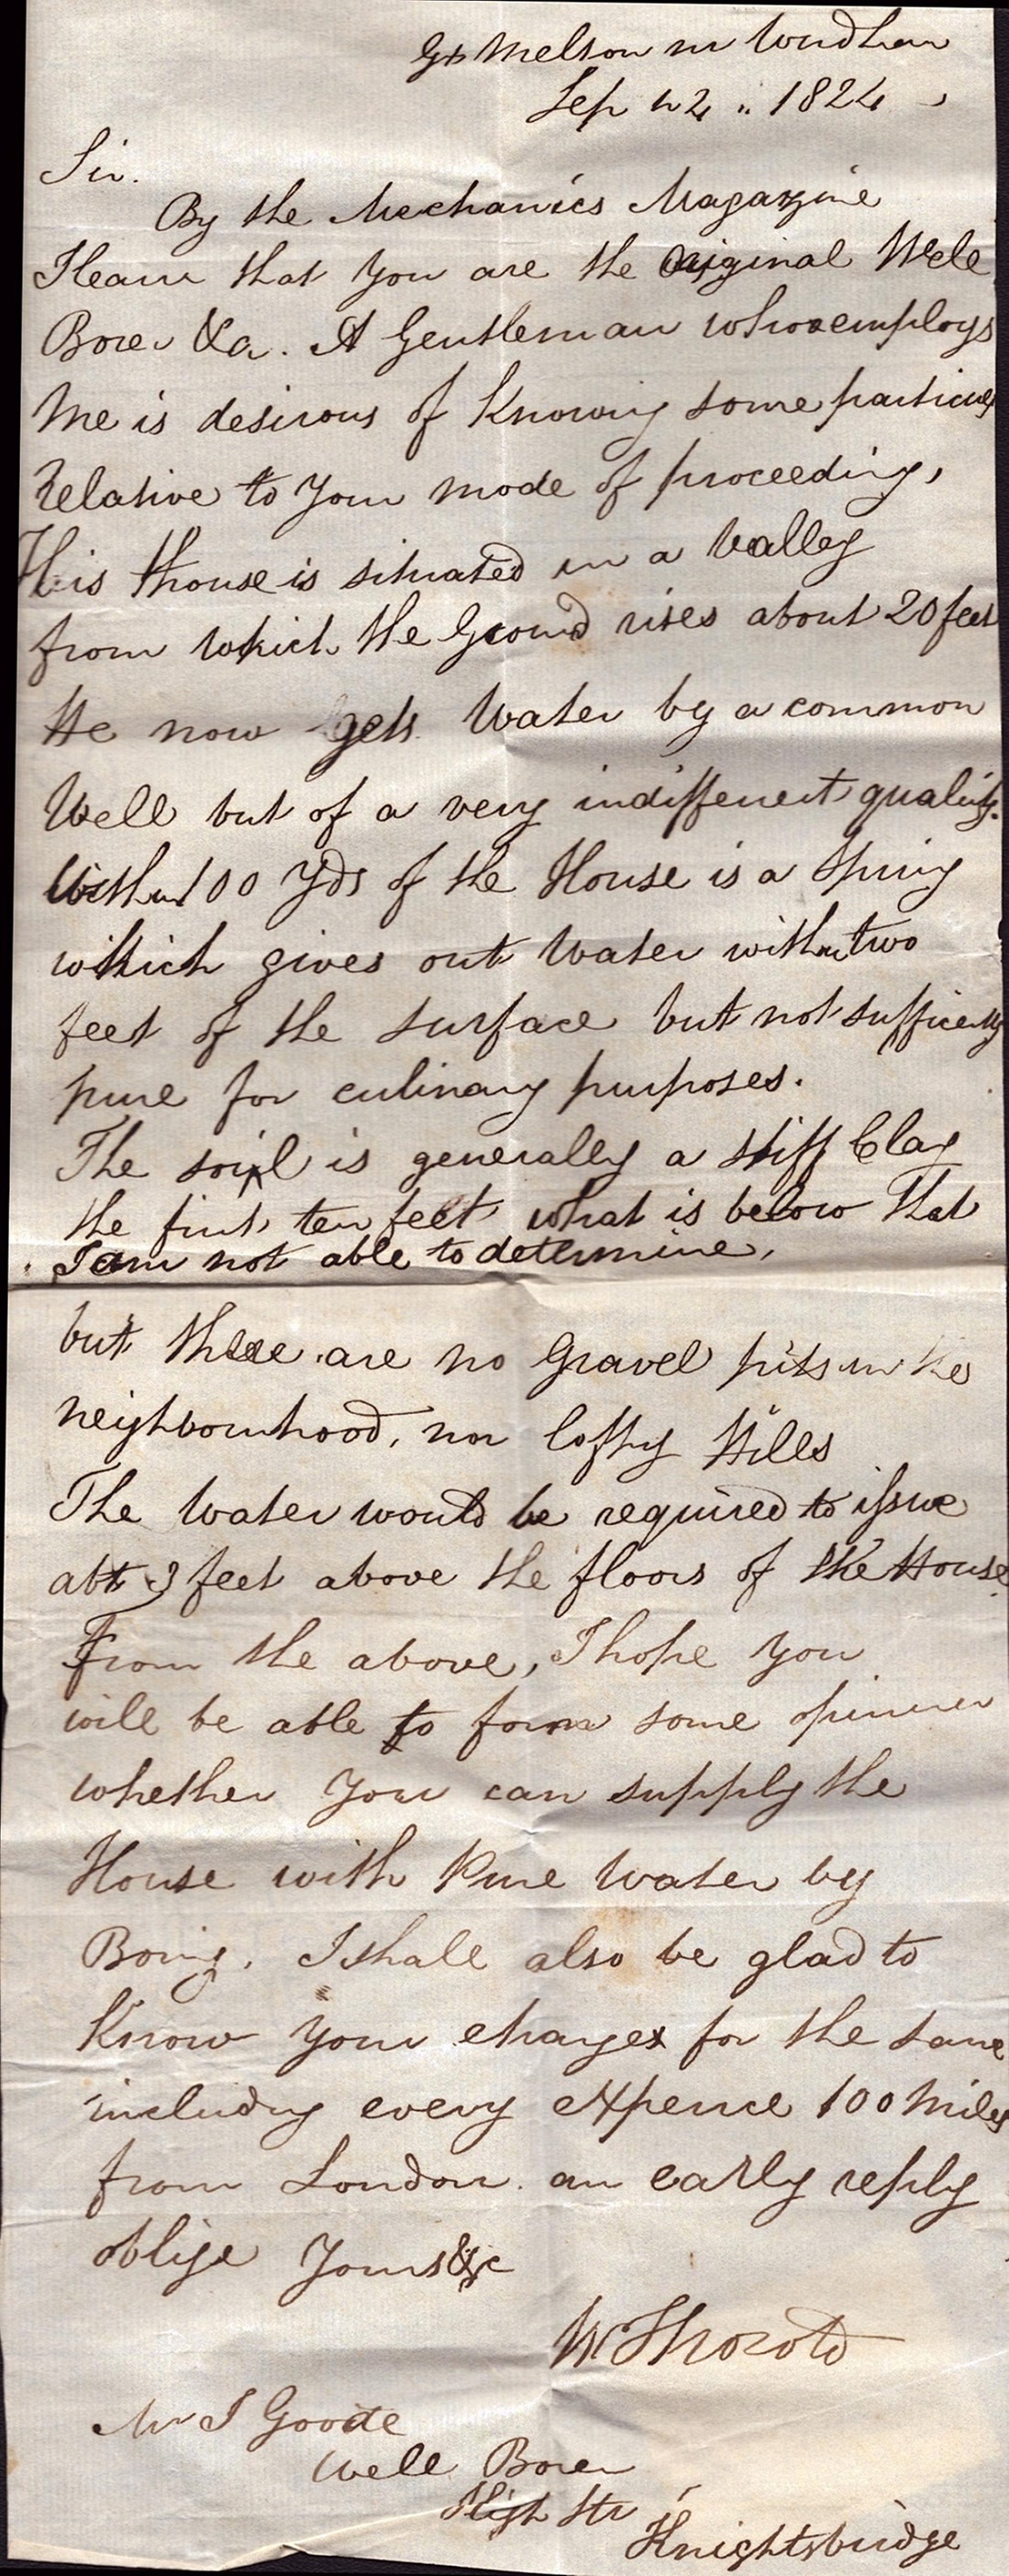 Handwritten Early Letters from 1824 about Details of Well Digging. Good Condition. All autographs